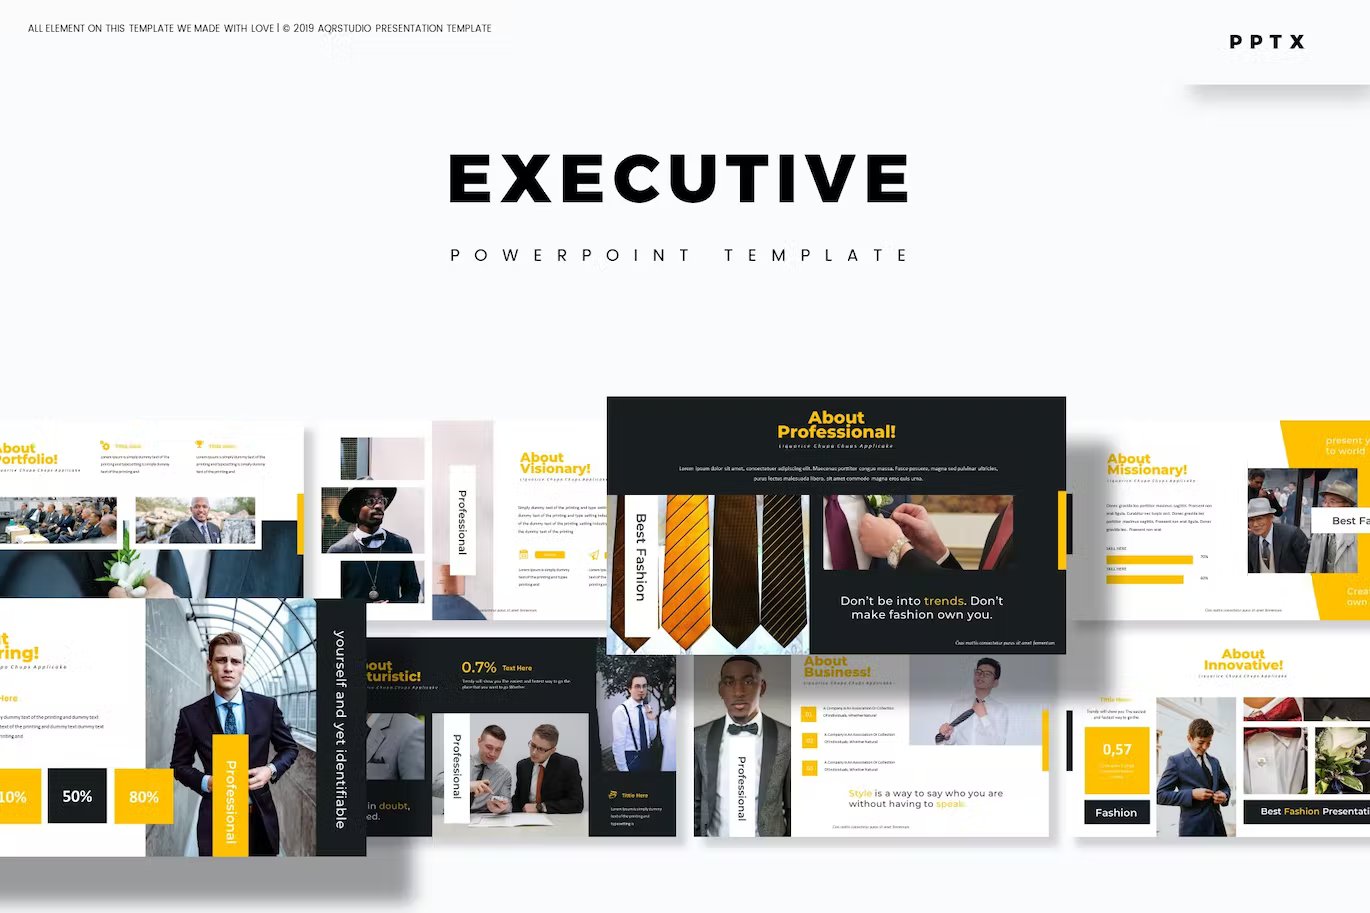 Black lettering "Executive Powerpoint Template" and different presentation templates on a white background.